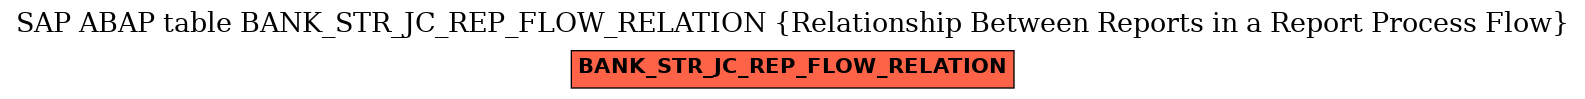 E-R Diagram for table BANK_STR_JC_REP_FLOW_RELATION (Relationship Between Reports in a Report Process Flow)